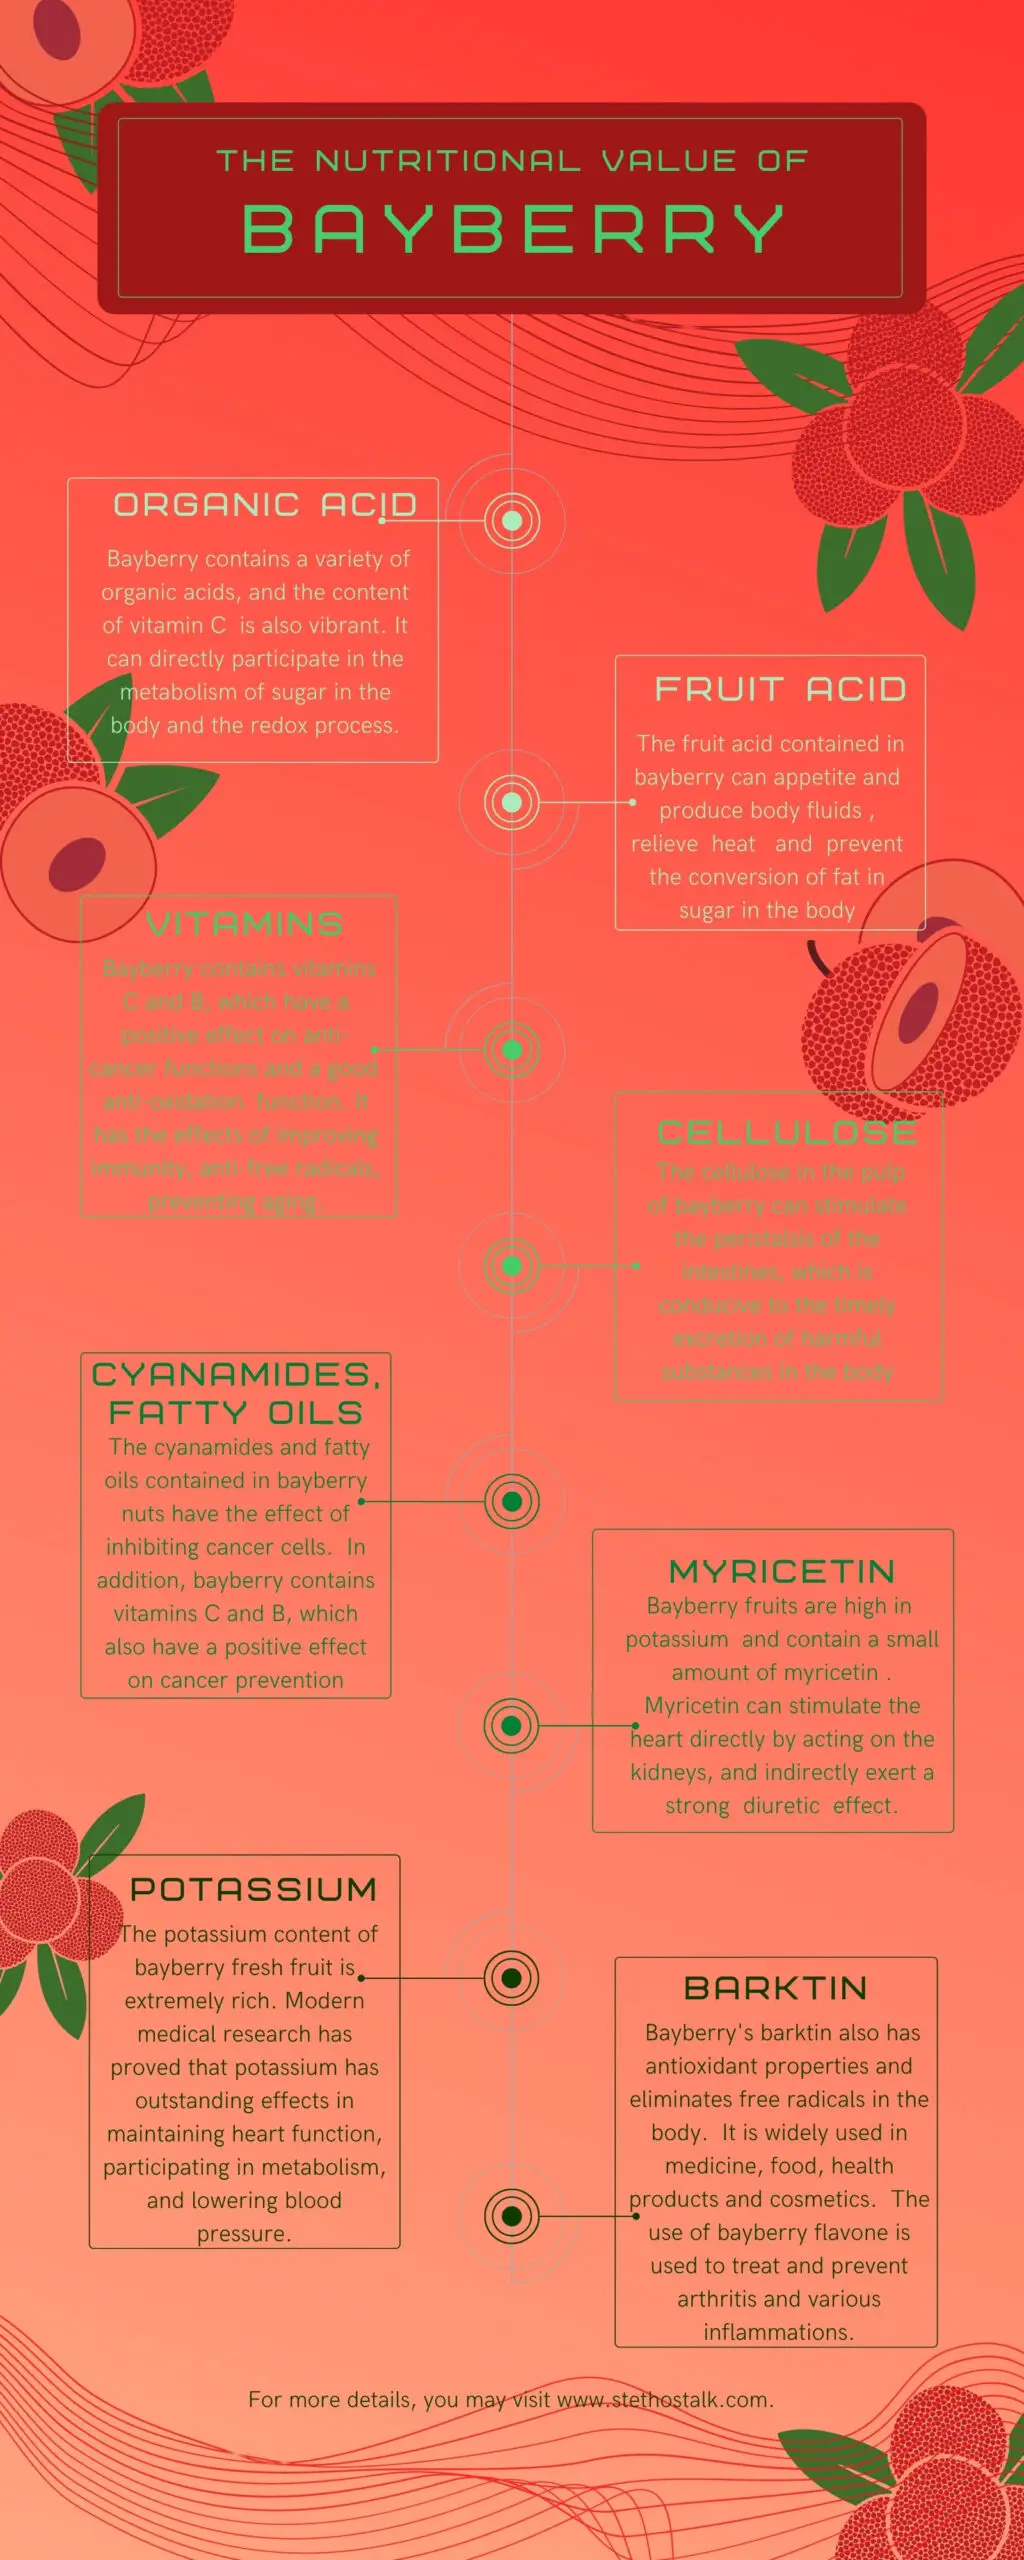 Bayberry benefits - Infographic